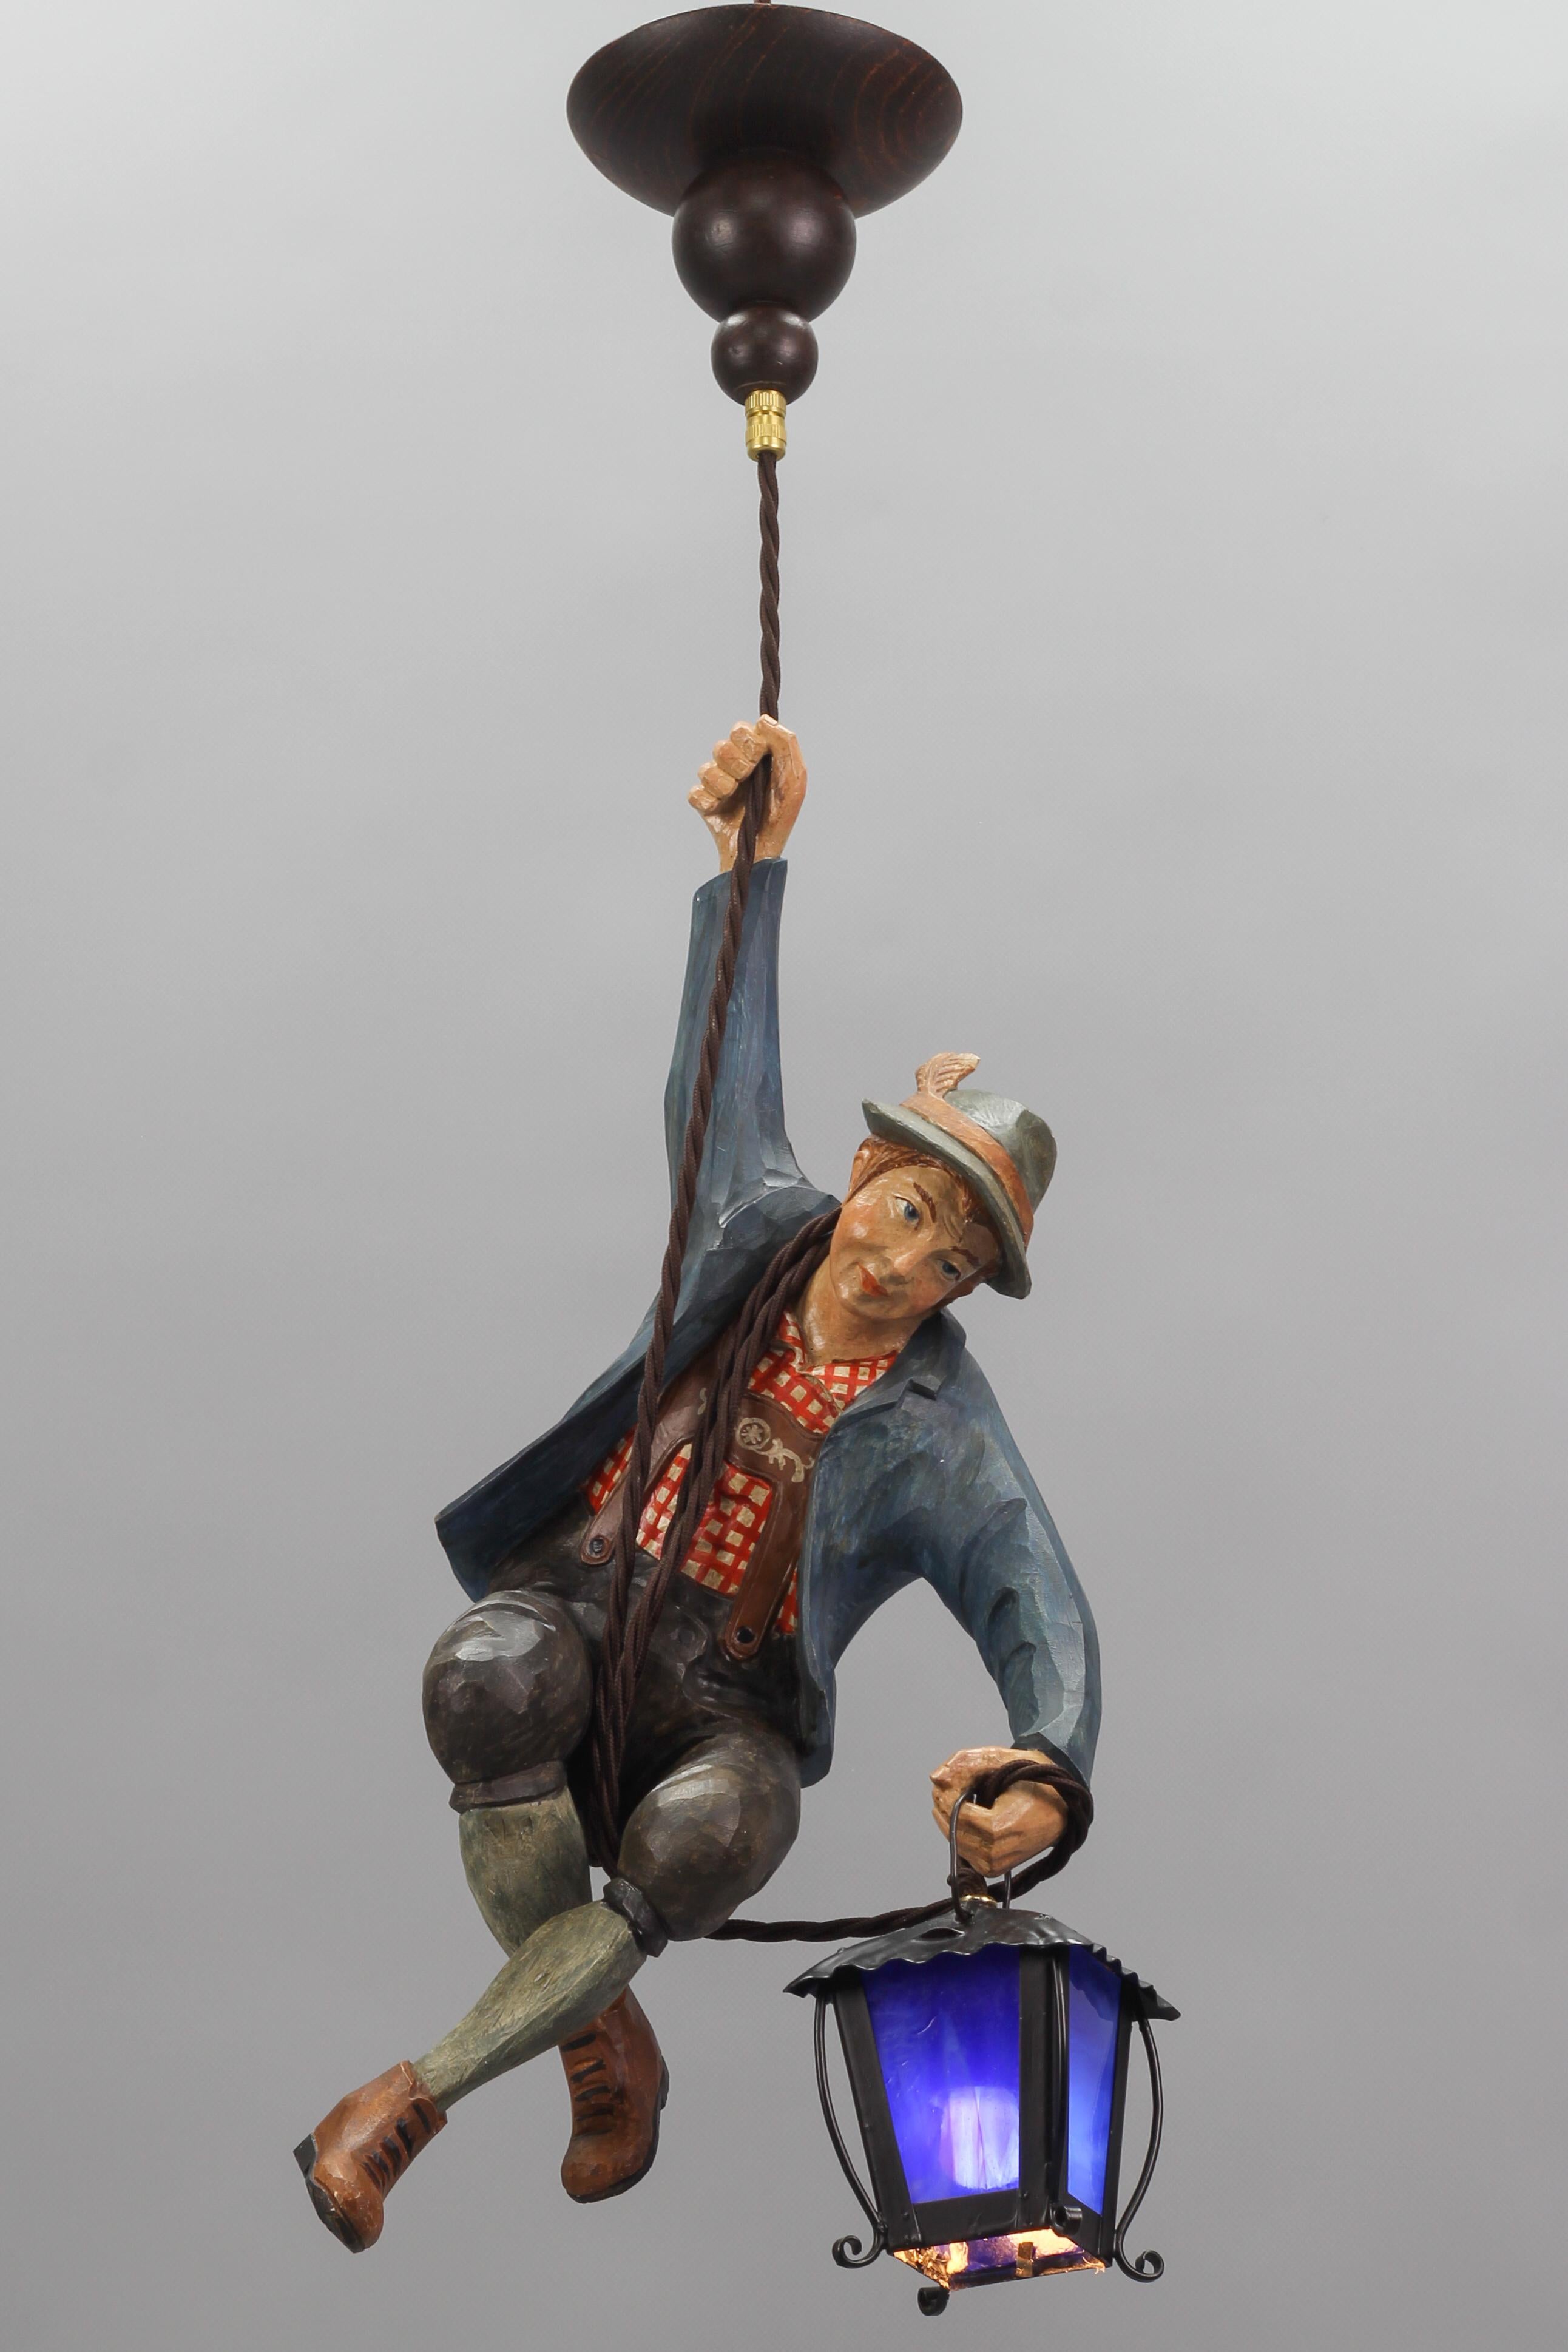 Wonderful German pendant lamp features a hand-carved figure of a smiling mountain climber in beautifully hand-painted Bavarian traditional clothing in blue, brown, green, white, and red colors. The detailed carved wooden figure wears a hat and is